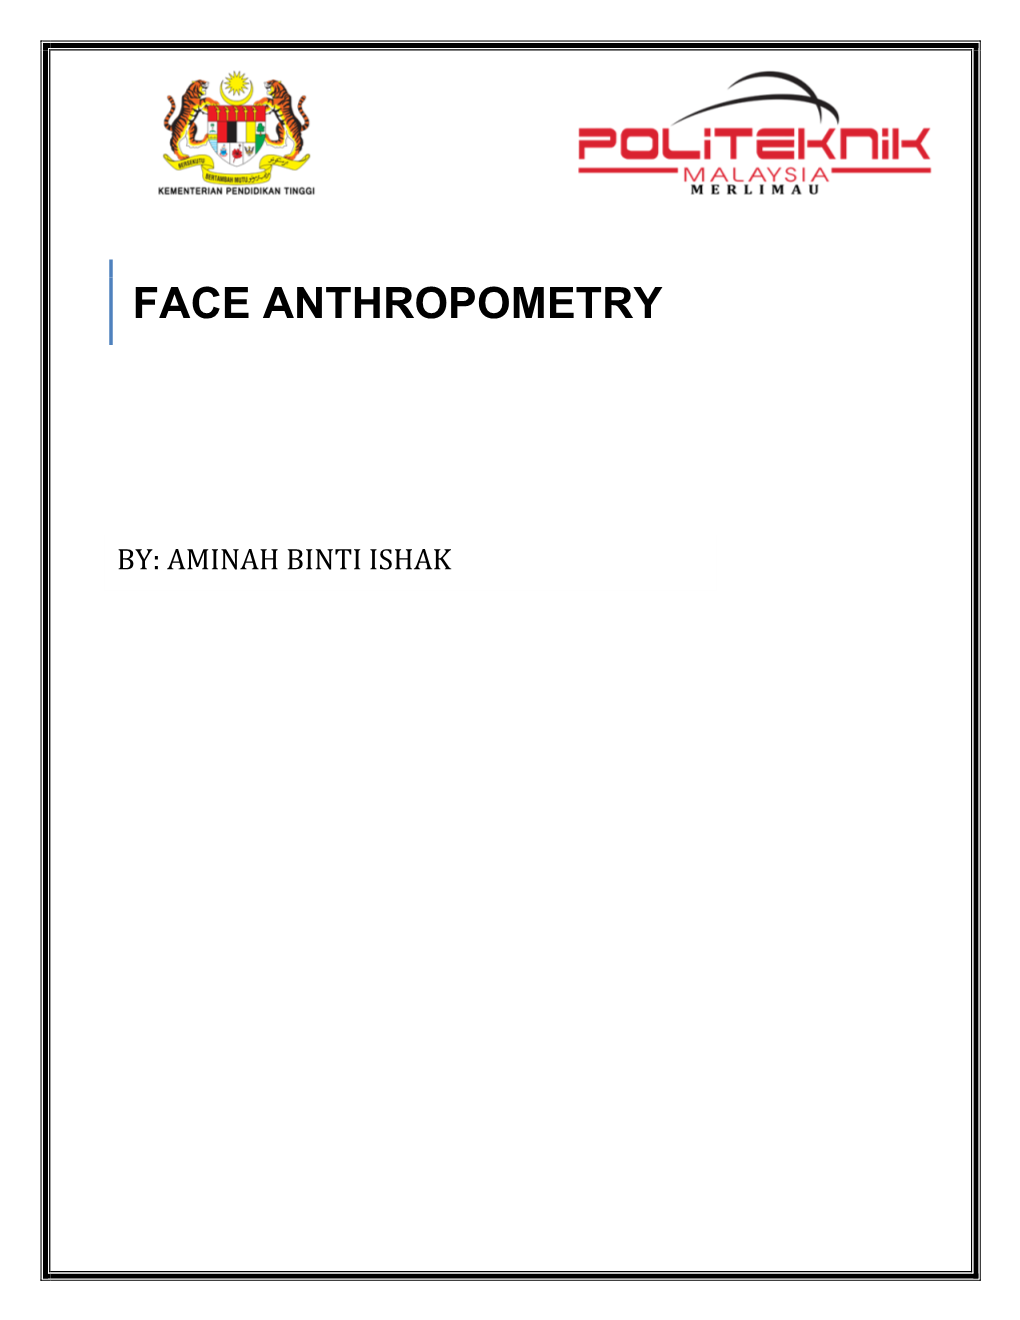 Anthropometry Is the Study of Human Body Measurement for Use in Anthropological Classification and Comparison